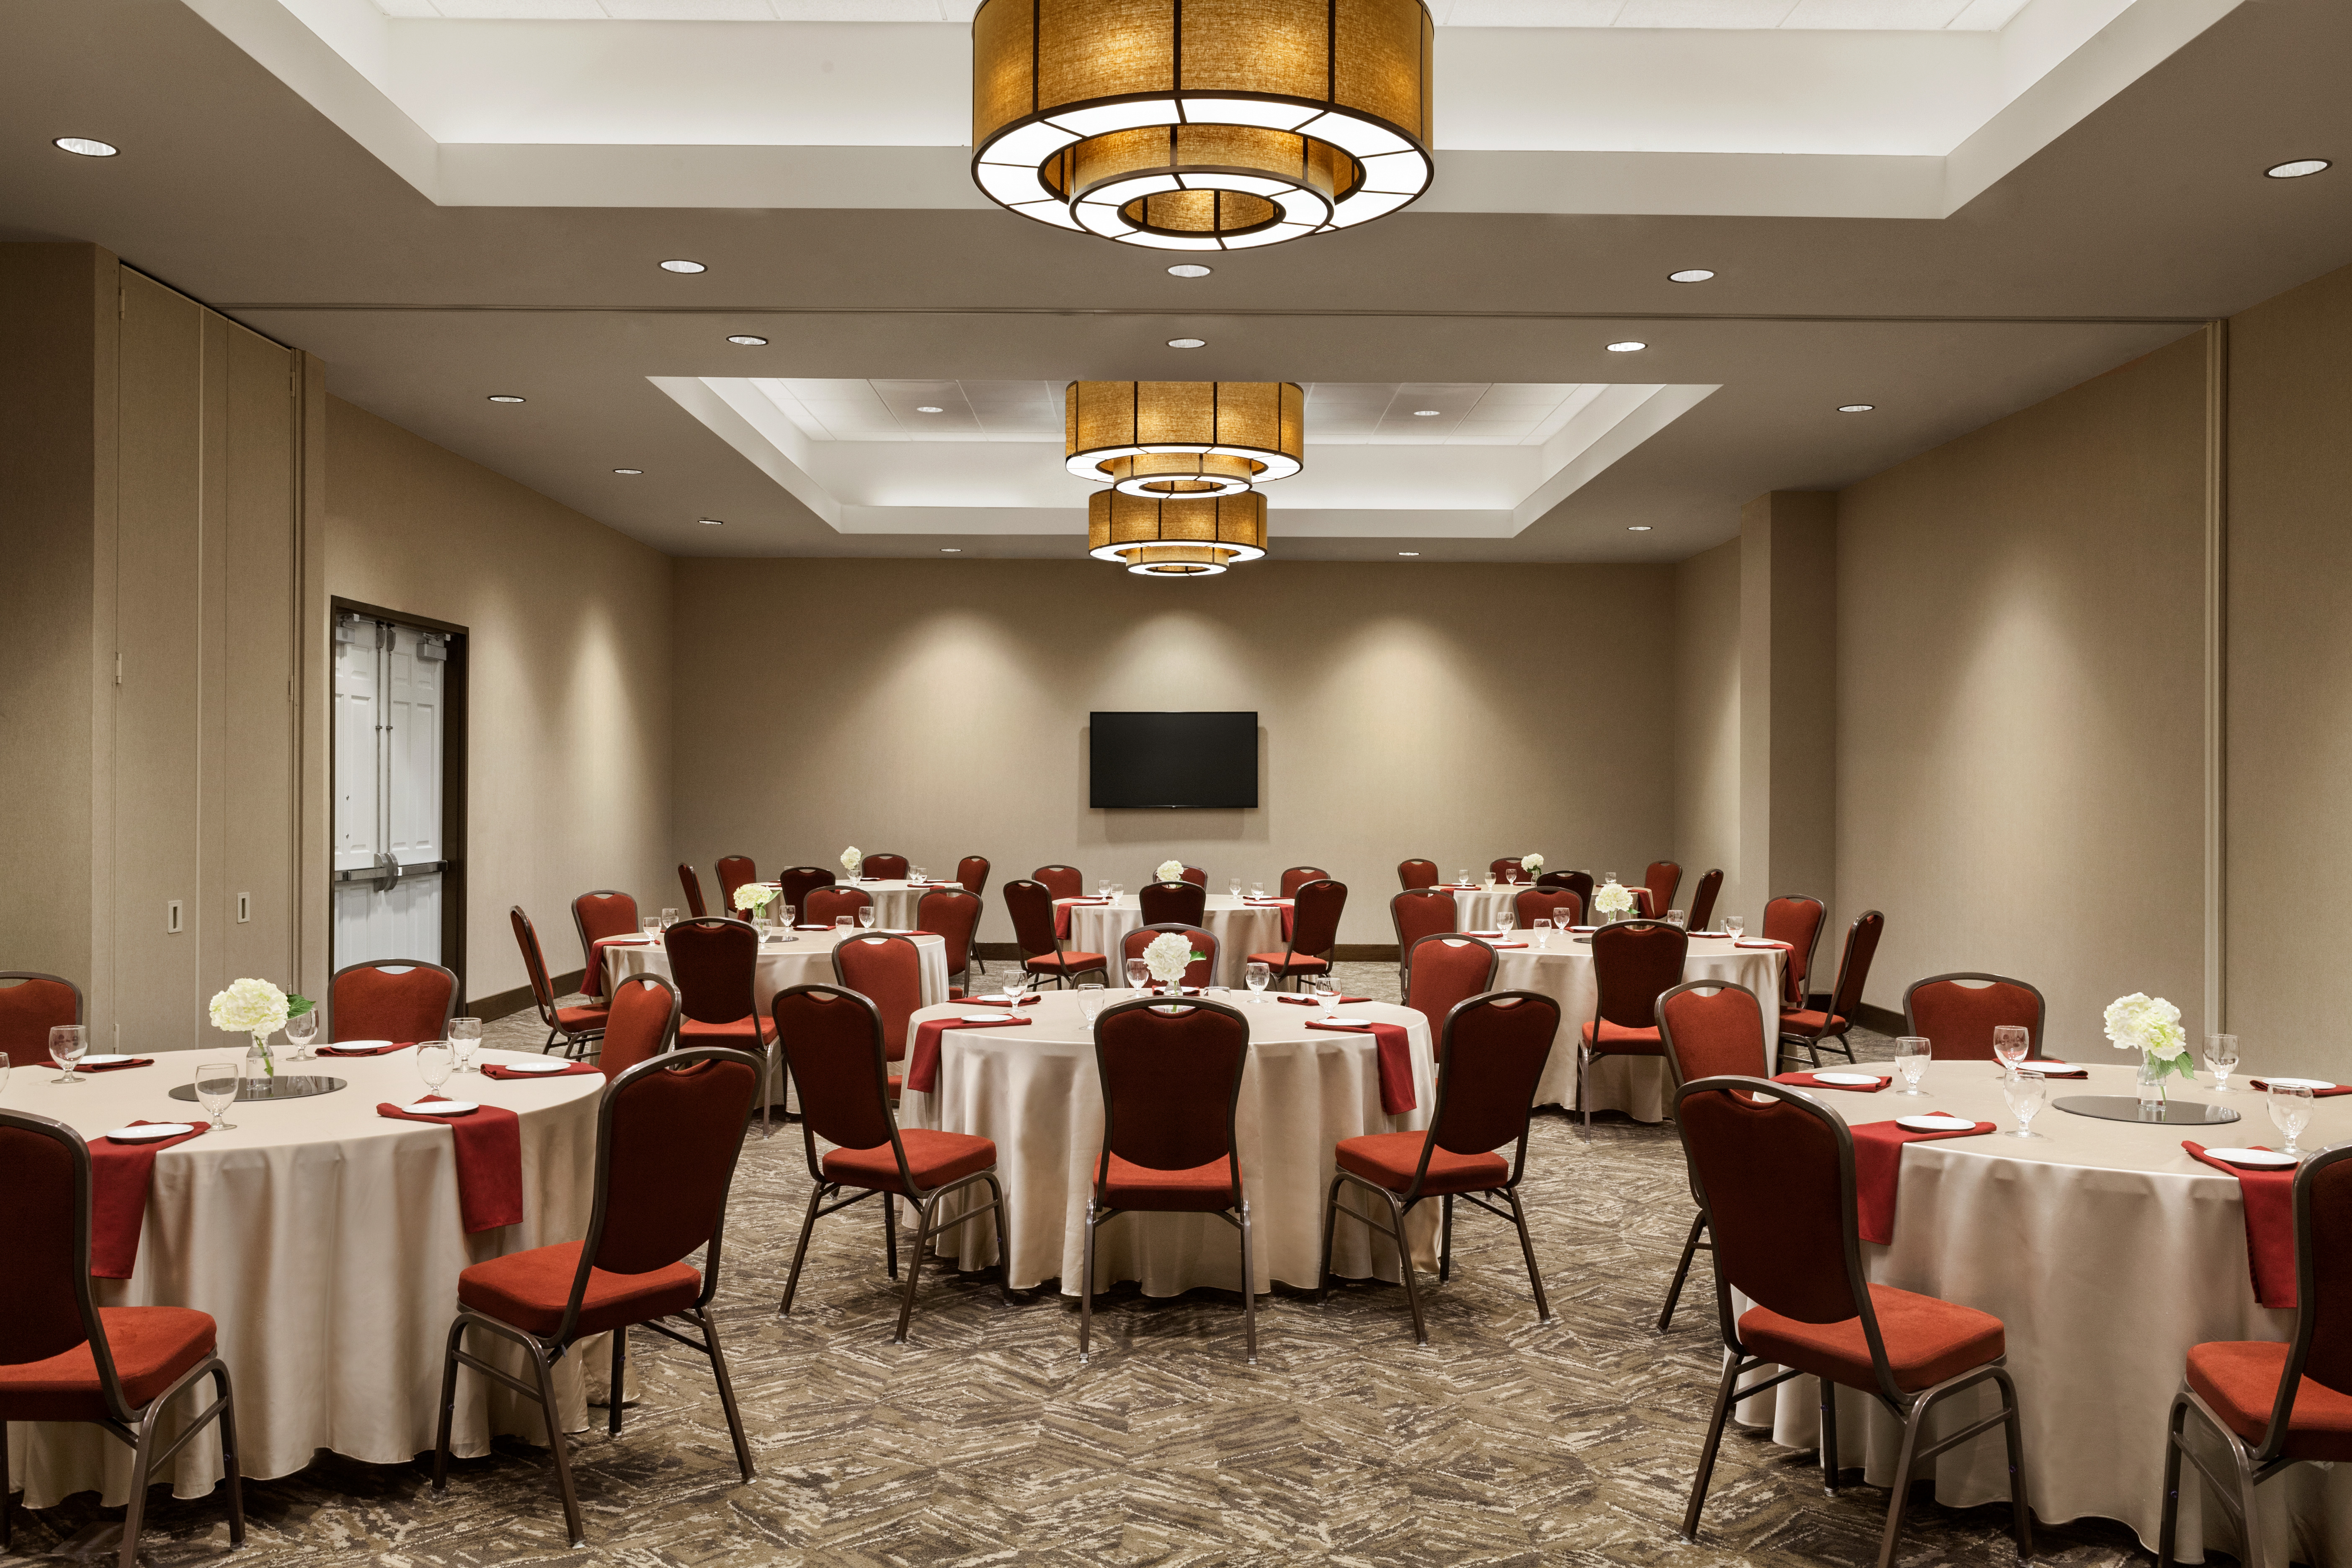 Spacious Ballroom Banquet Setup with Roundtables, Chairs and Wall Mounted HDTV